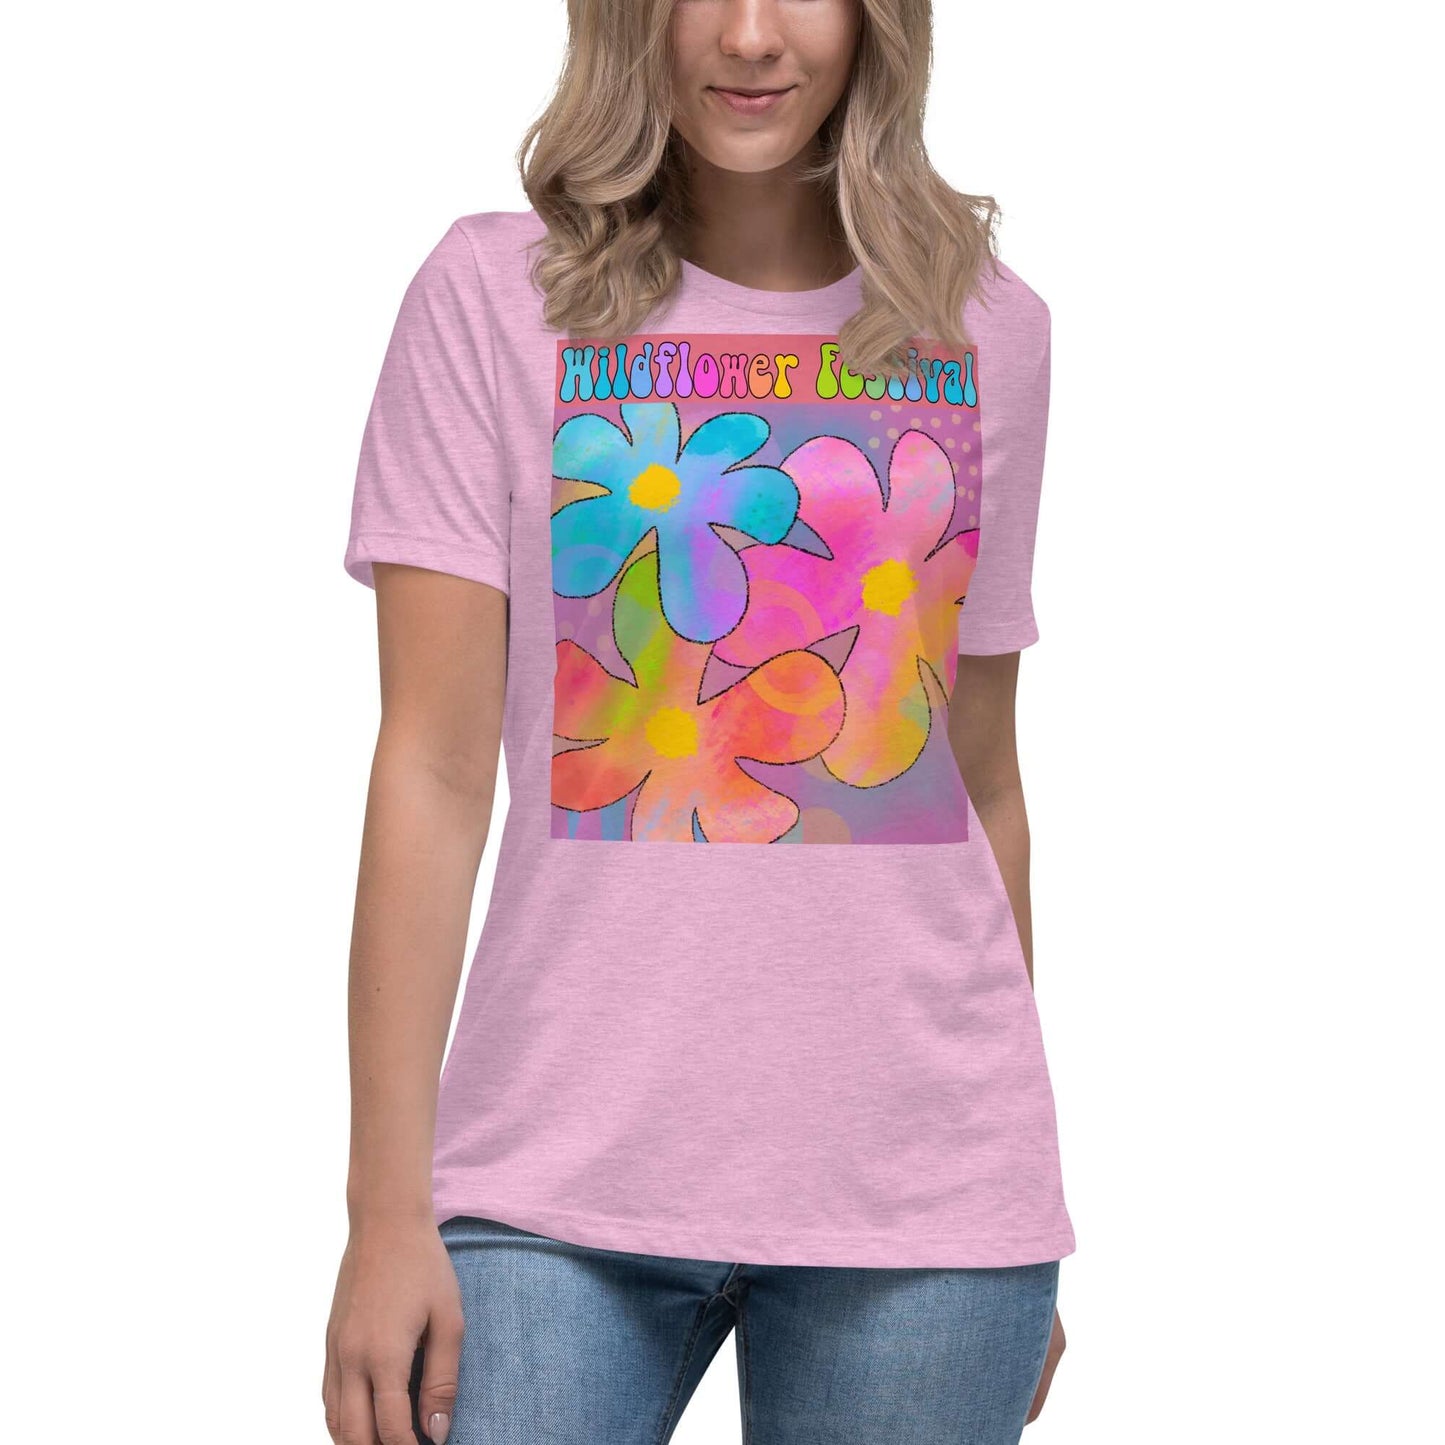 Big Colorful Hippie 1960s Psychedelic Flowers with Text “Wildflower Festival” Women’s Short Sleeve Tee in Heather Prism Lilac